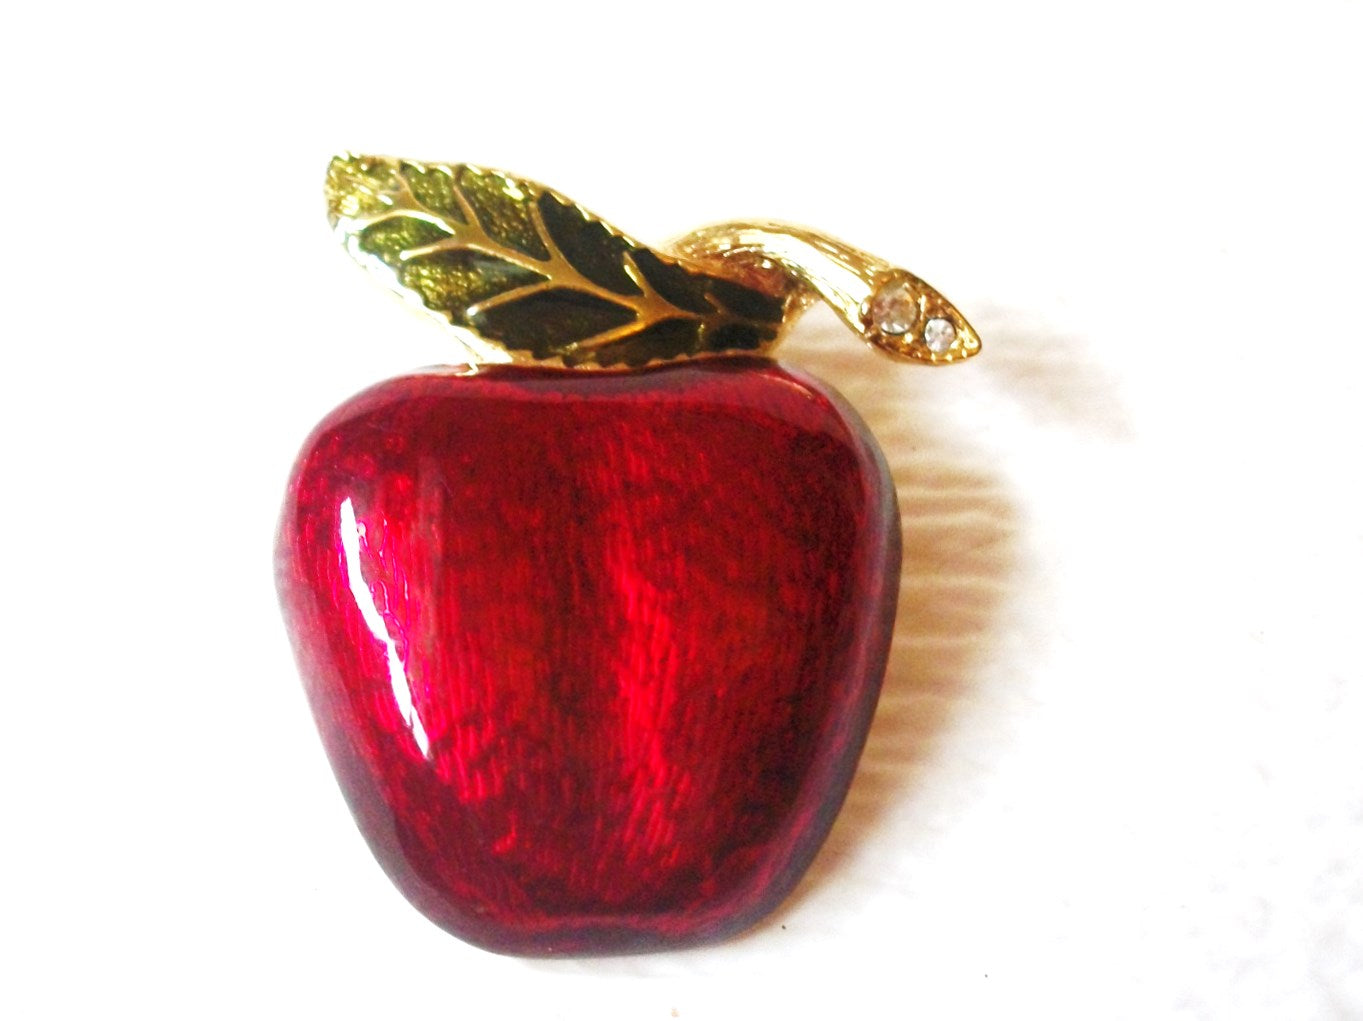 Vintage Brooch Pin Gold Toned Enameled Red Apple 010721